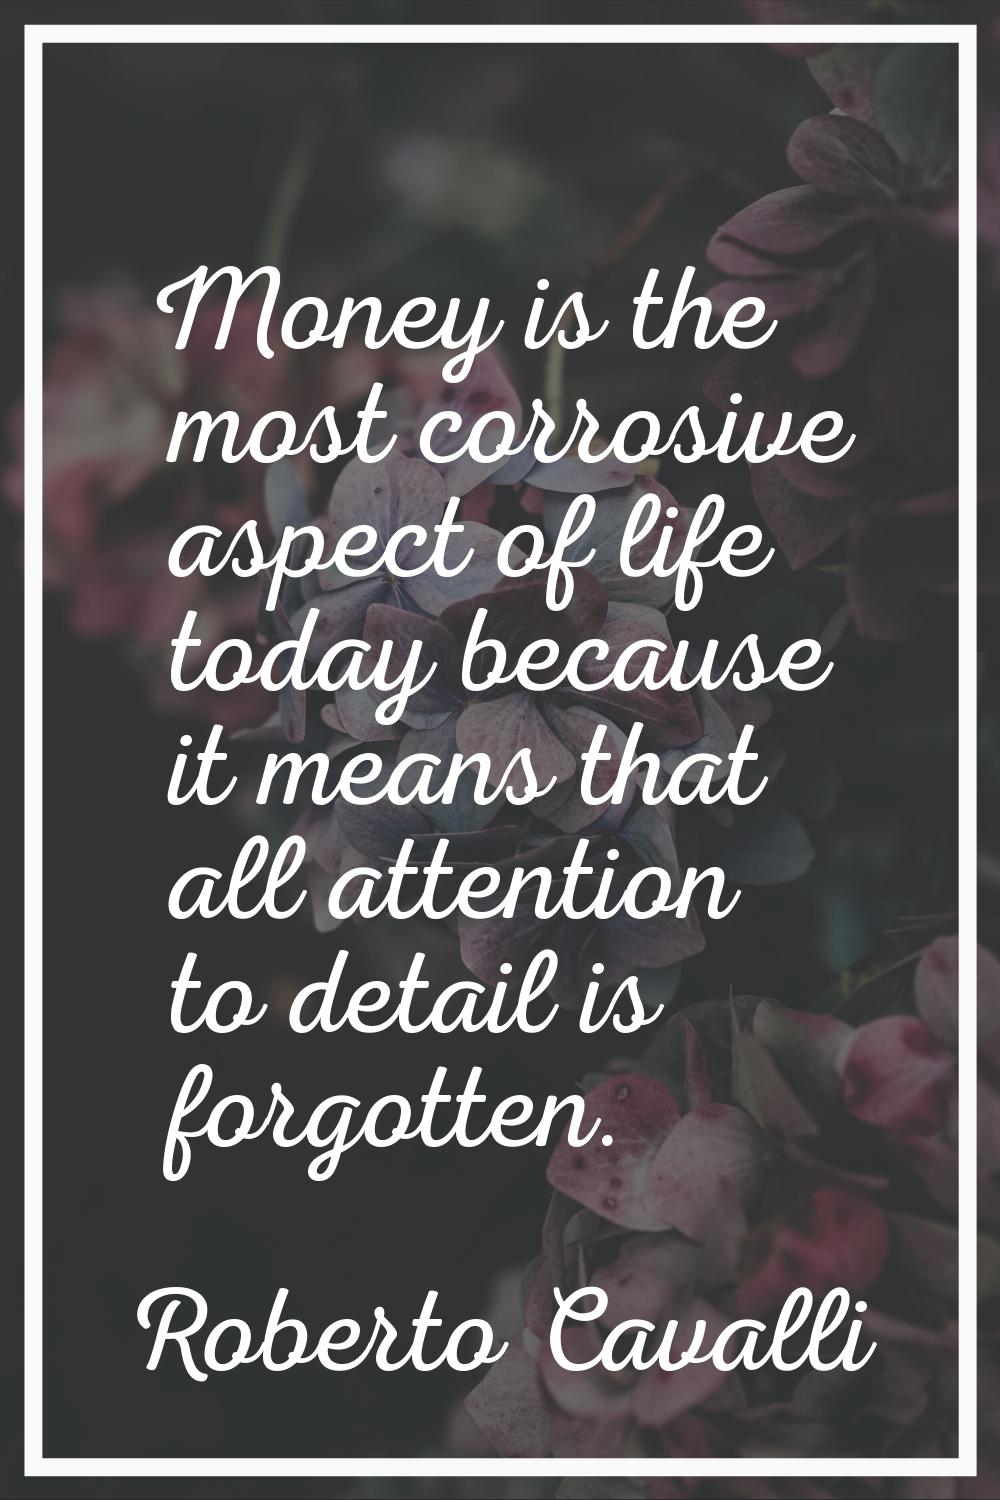 Money is the most corrosive aspect of life today because it means that all attention to detail is f